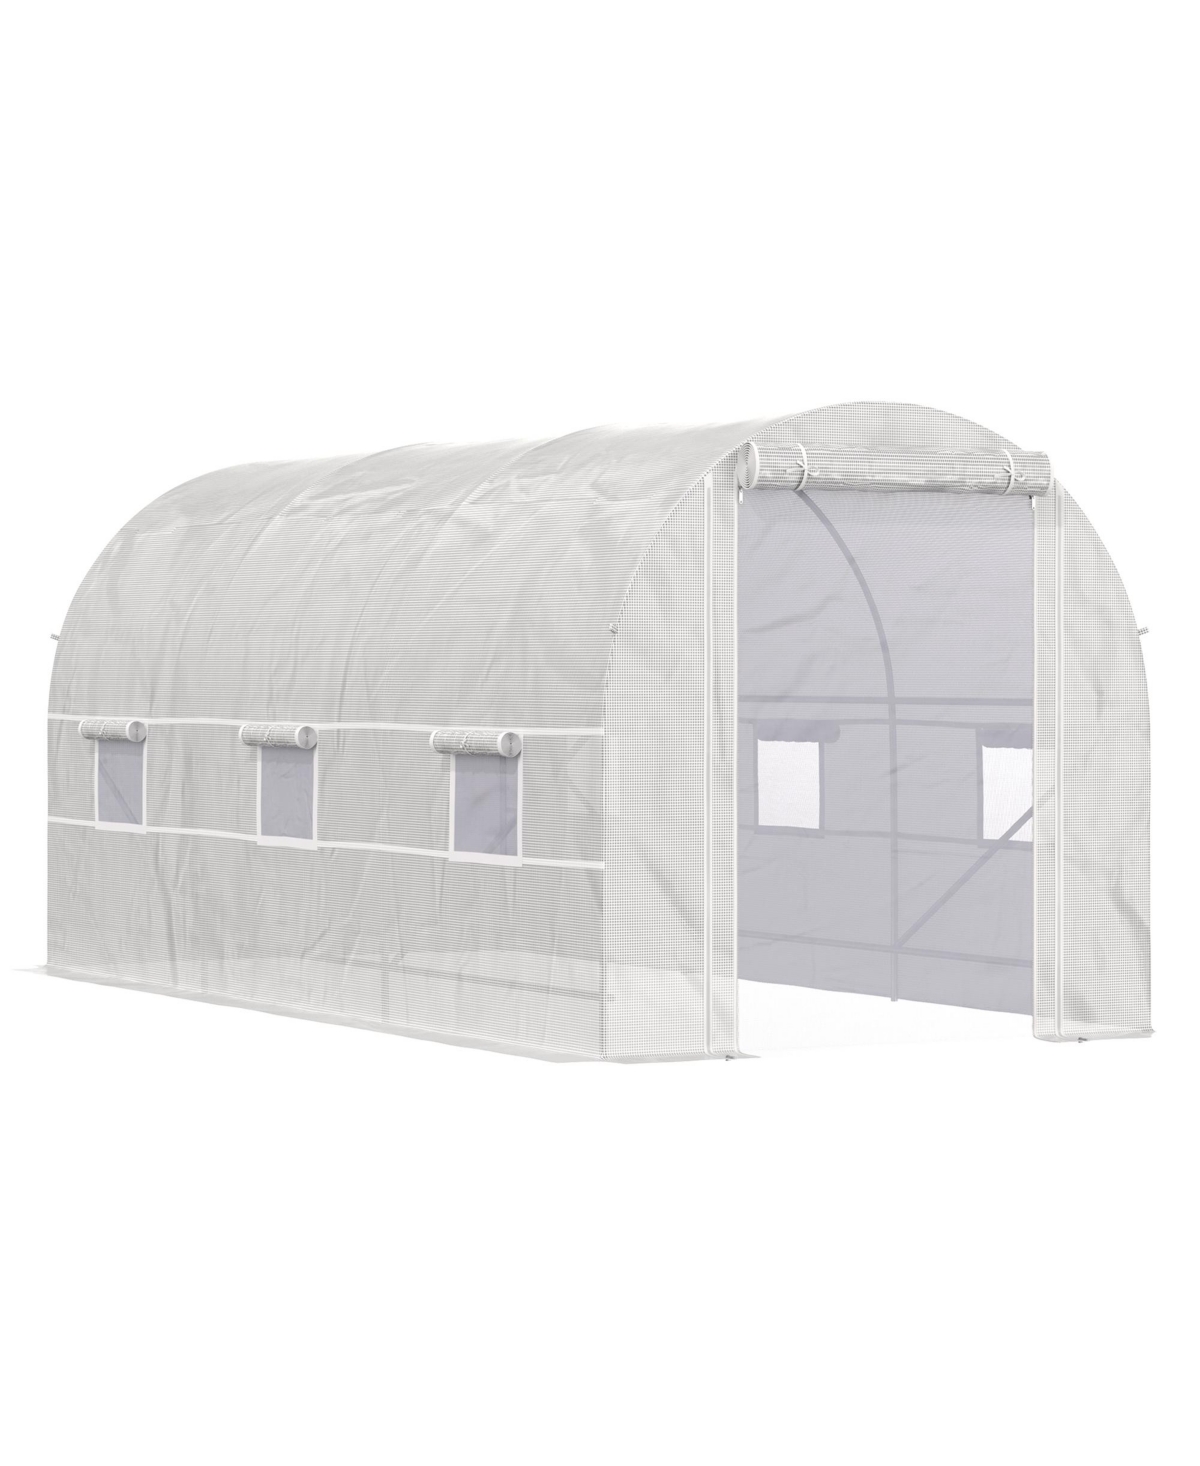 15' x 7' x 7' Walk-In Tunnel Greenhouse, Large Garden Hot House Kit with 6 Roll-up Windows & Roll Up Door, Steel Frame, White - White